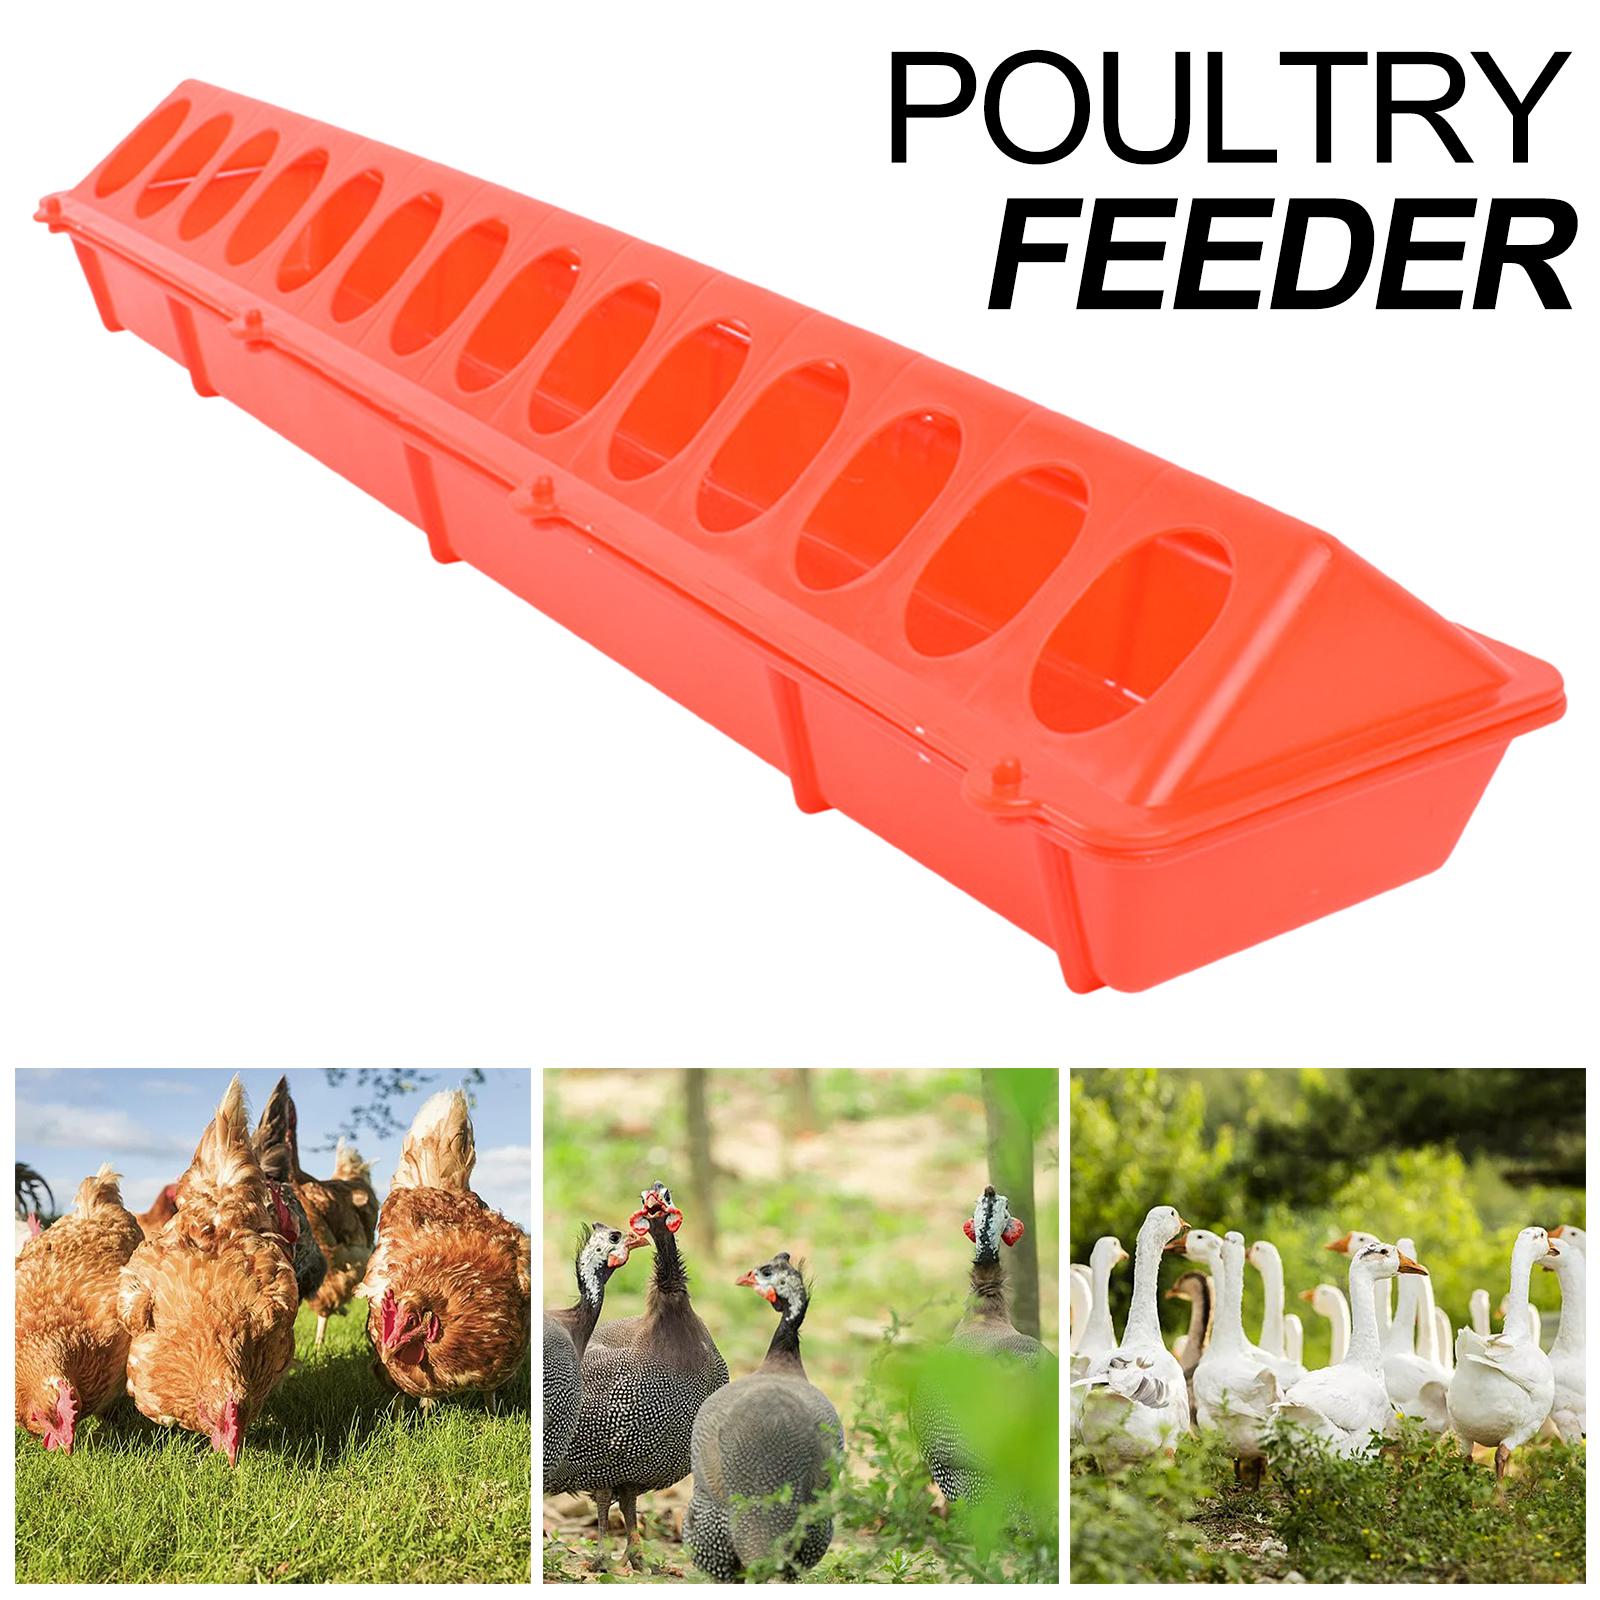 Flip Top Poultry Feeder Birds feed Long Trough for Livestock Pigeons Budgies